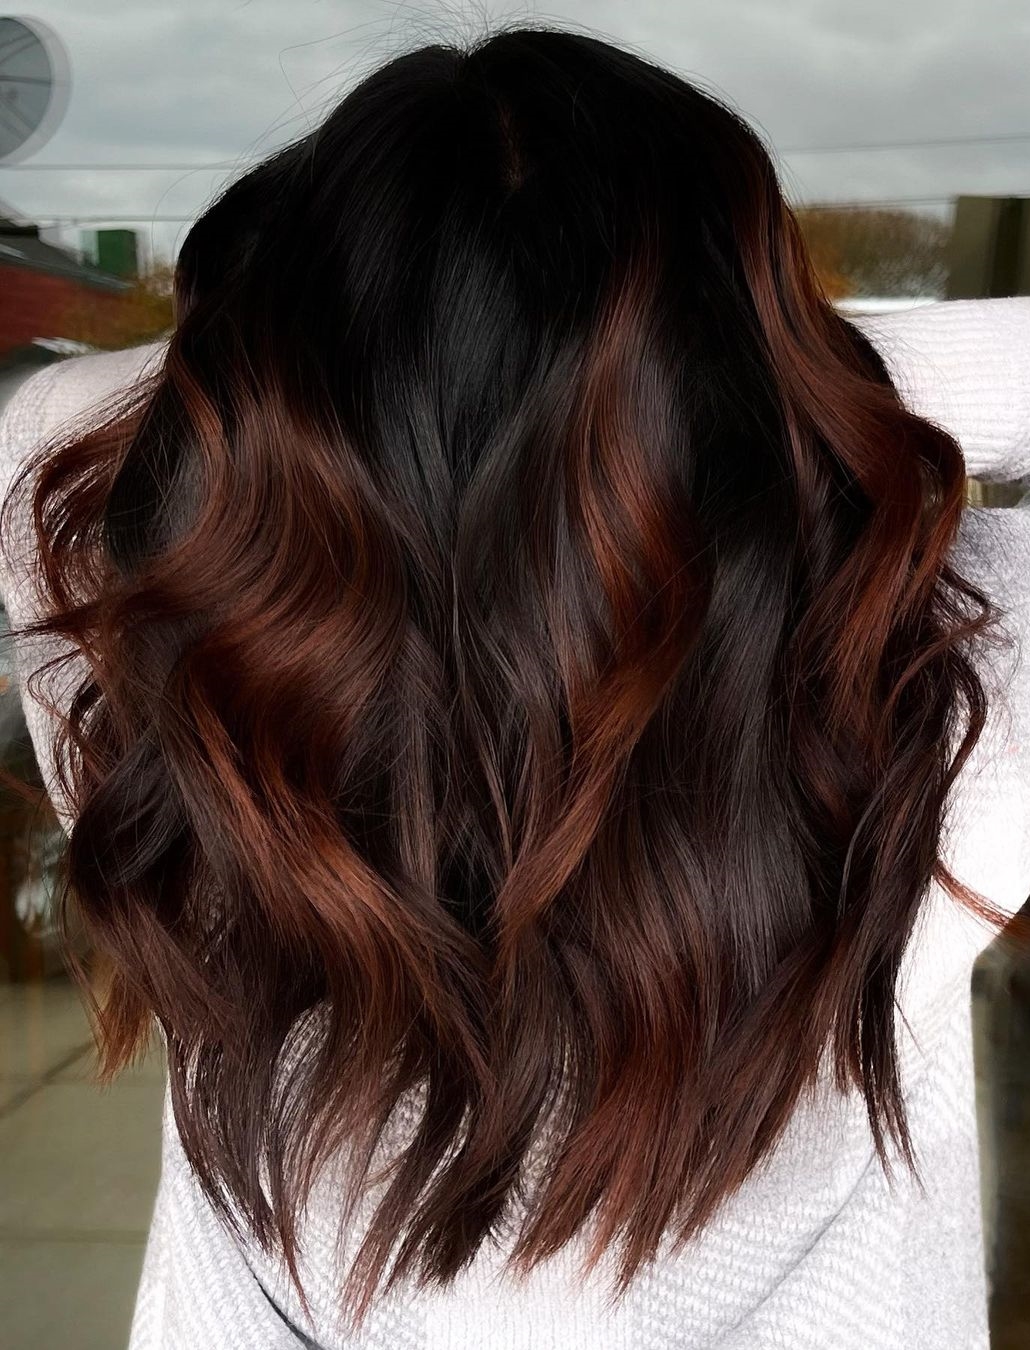 15 Glamorous Partial Highlights for Every Natural Hair Color - Hairstylery